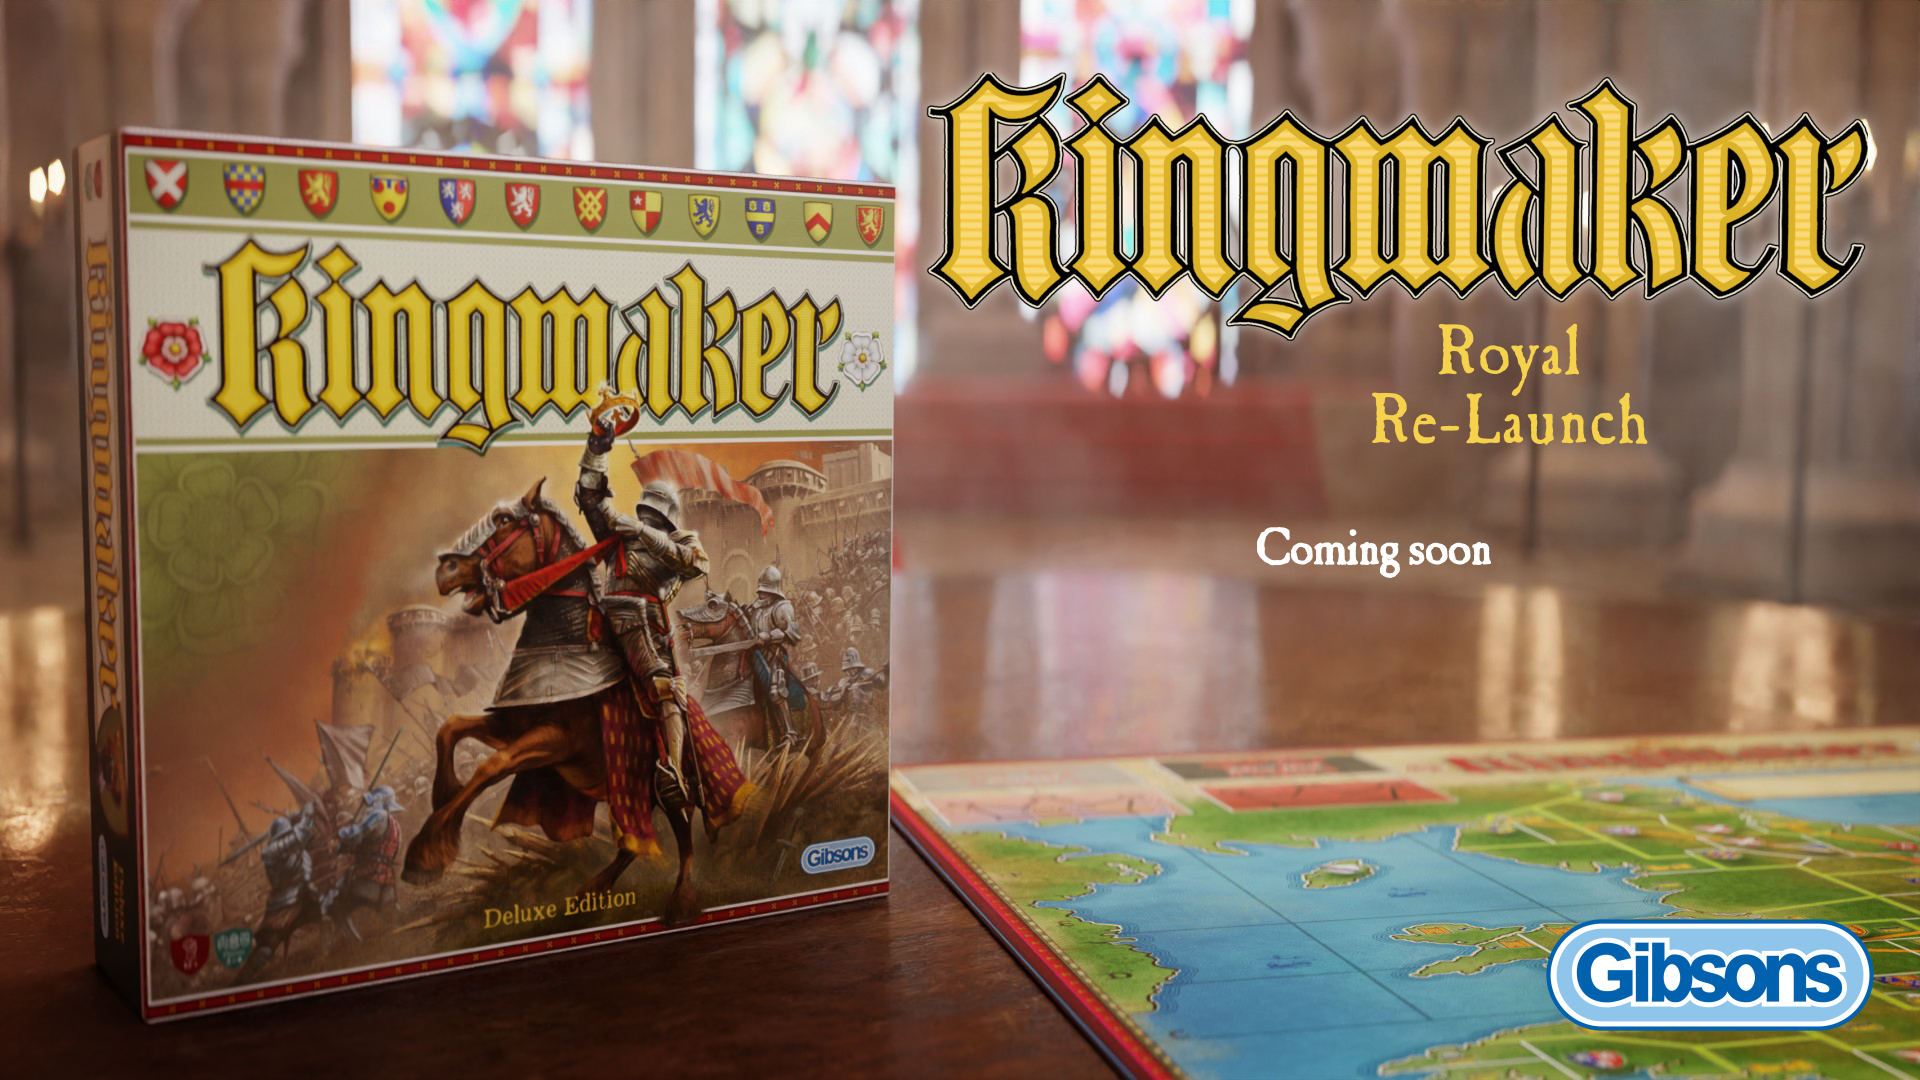 Introducing Kingmaker...The Royal Re-launch!